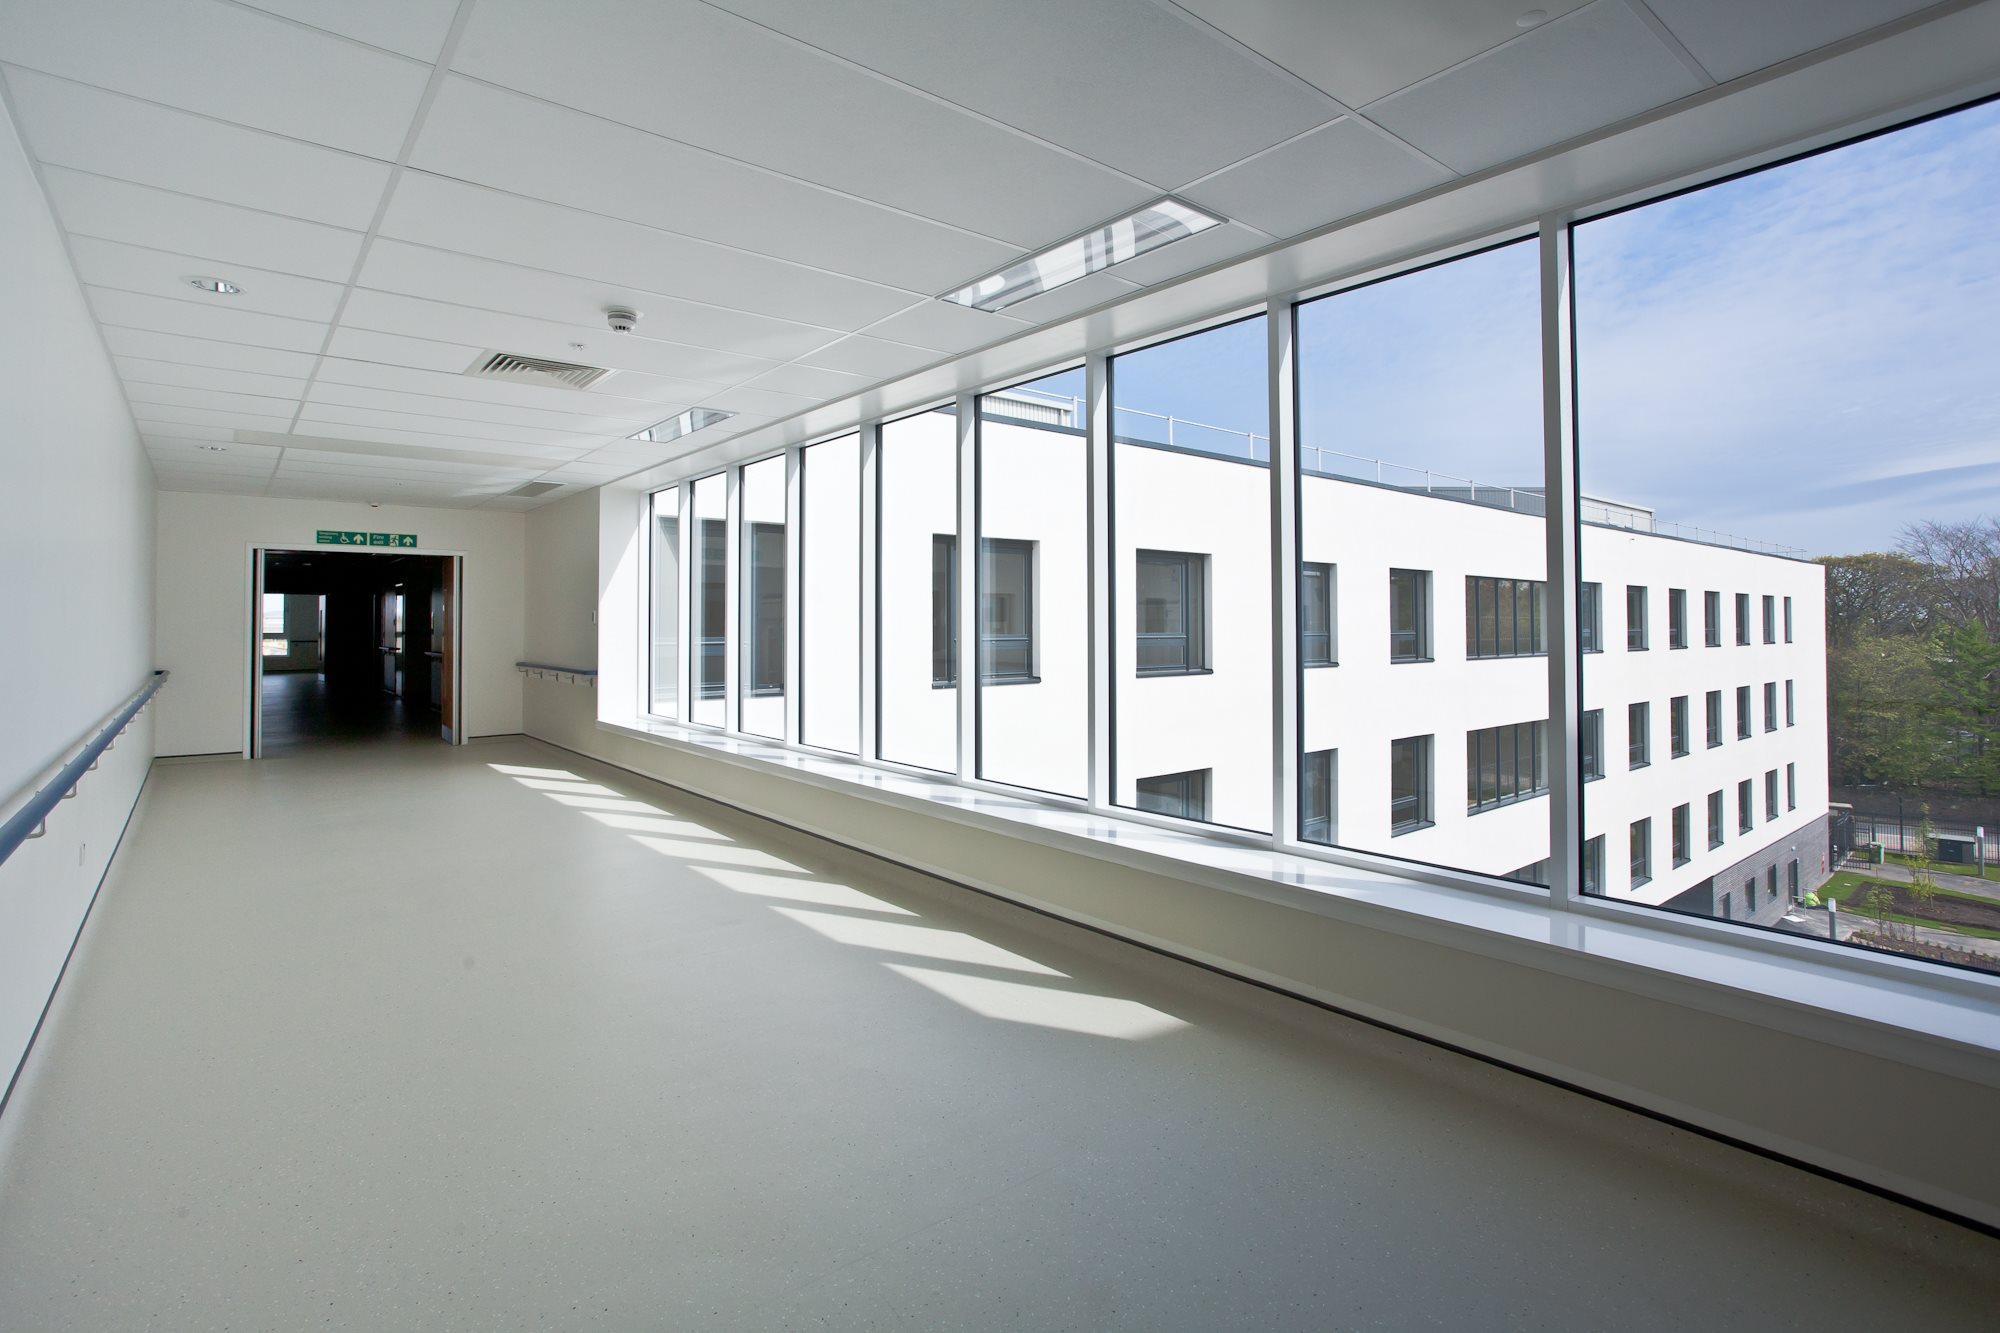 Inside the hospital corridor looking outwards